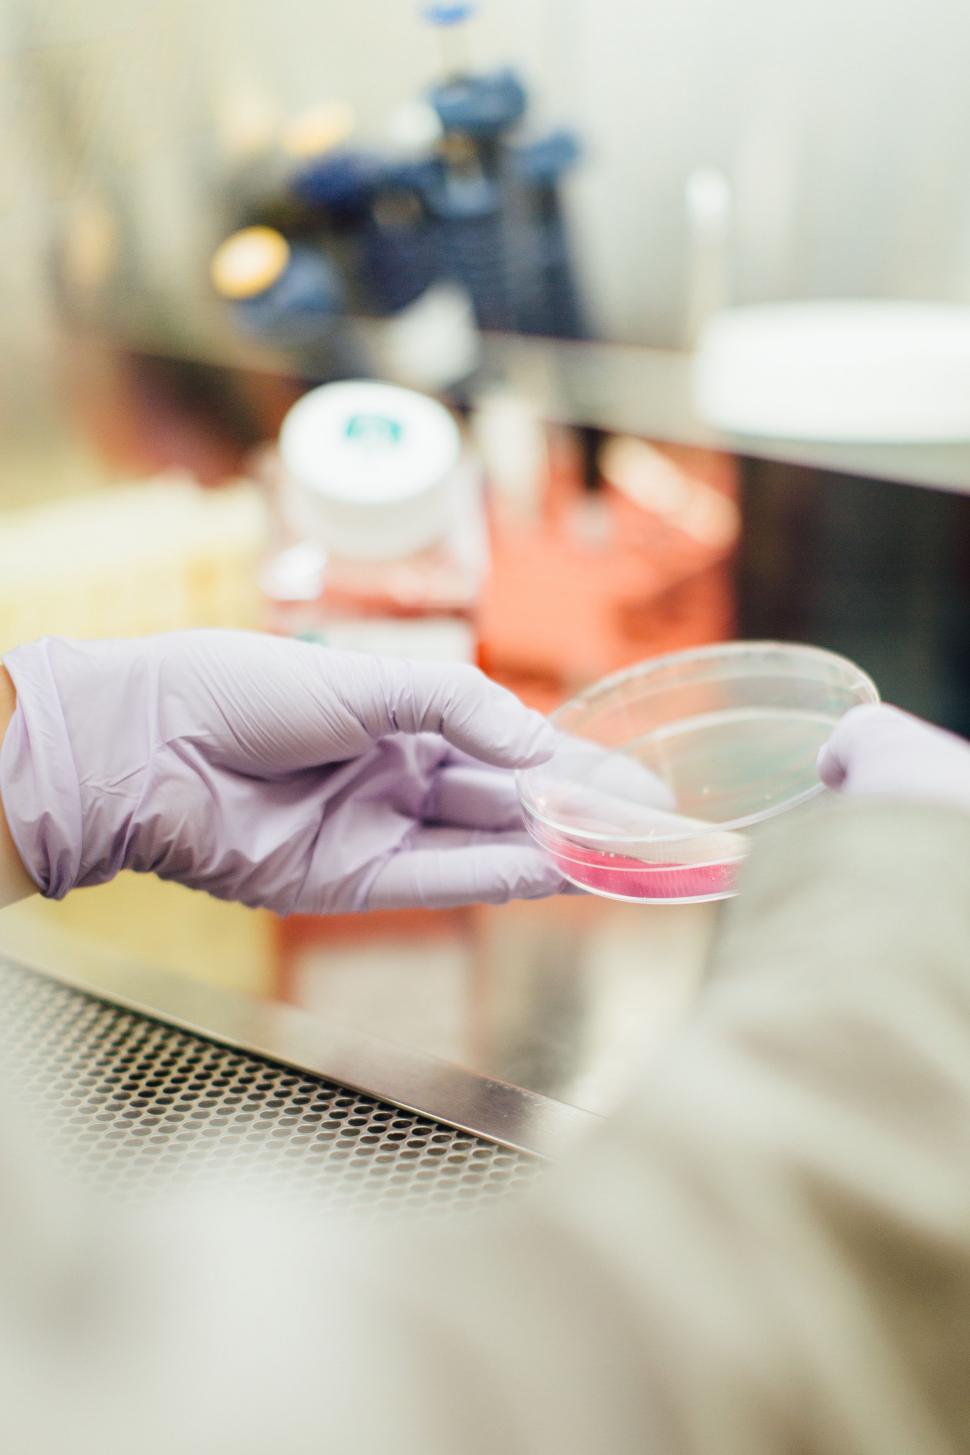 Free Image of Scientist in Lab Coat and Purple Gloves 